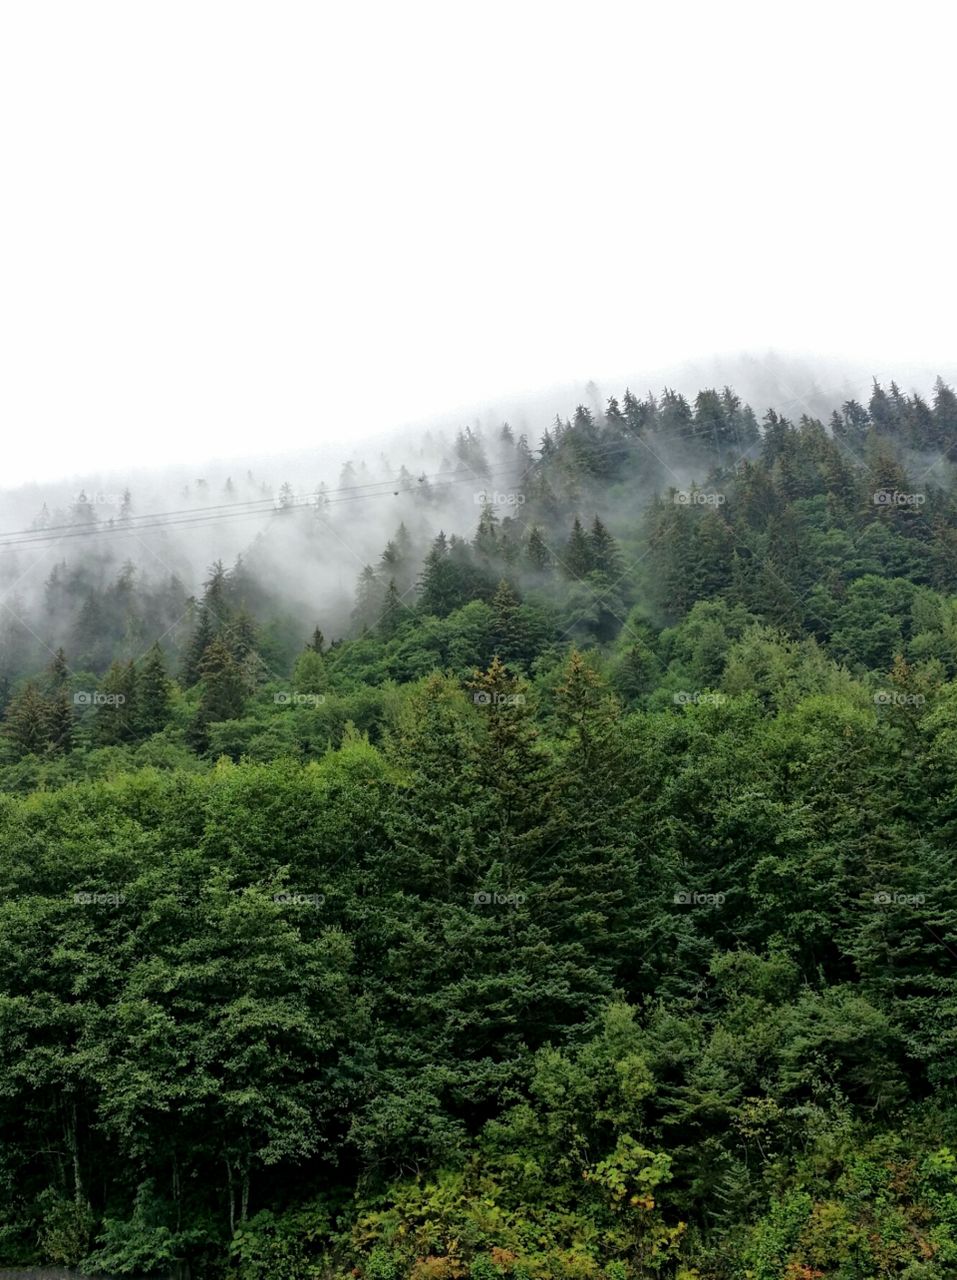 Beautiful mountains cover with trees and fog.
Juneau - Alaska